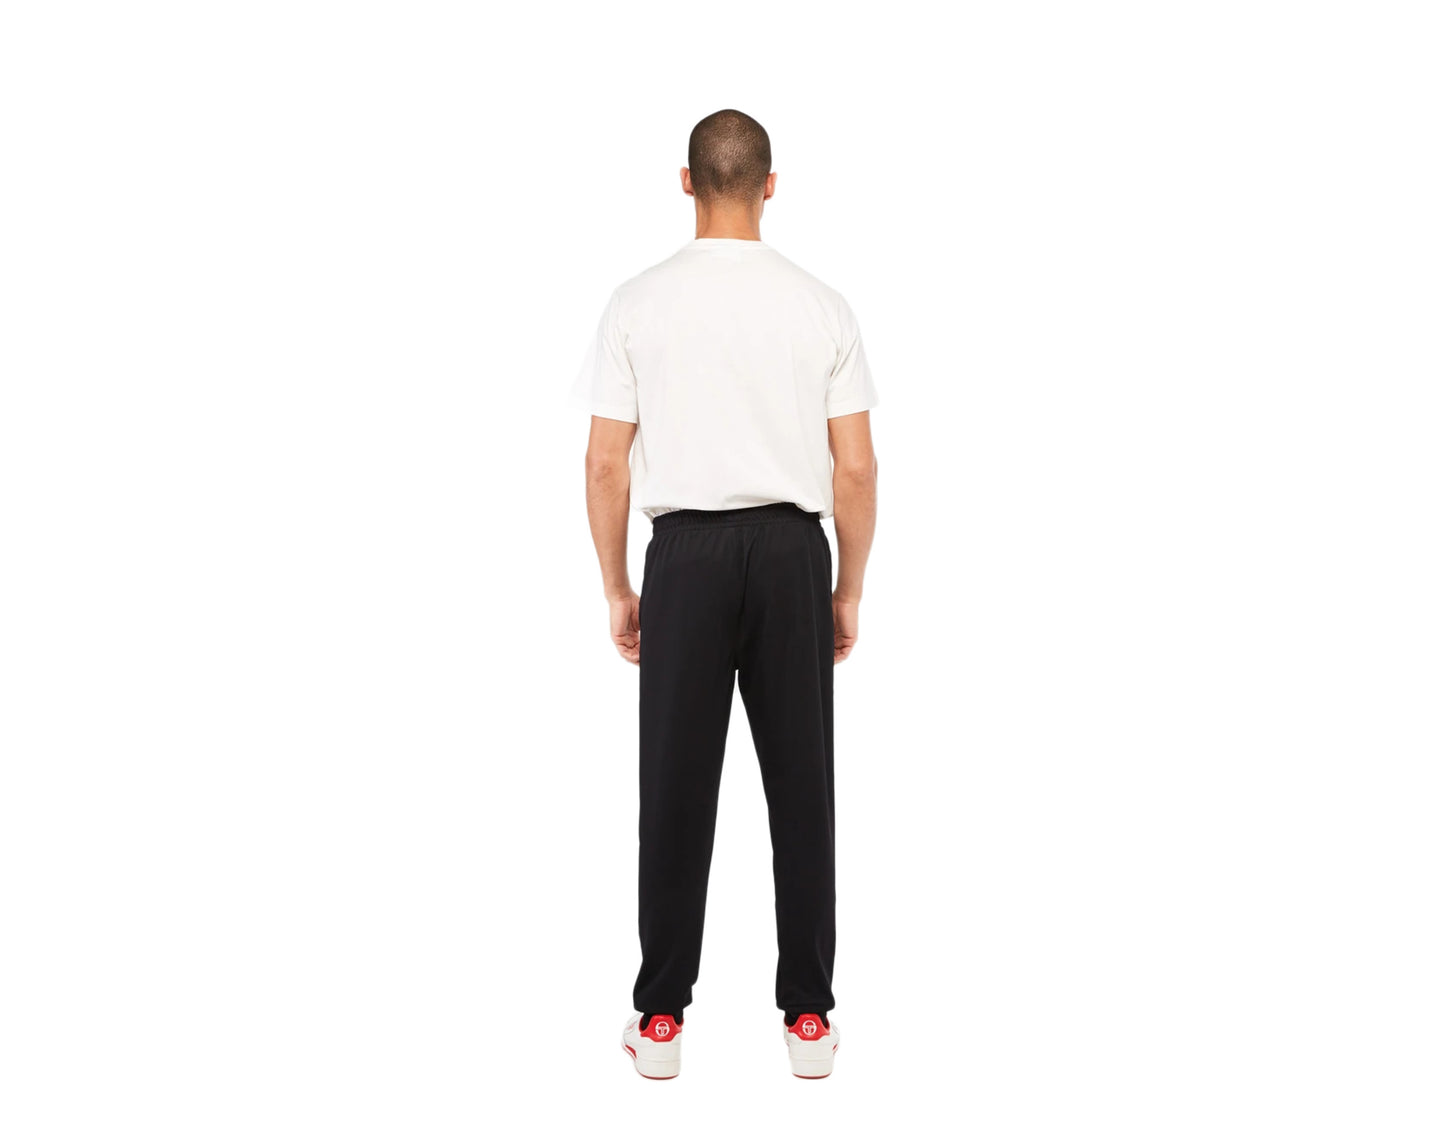 Sergio Tacchini Young Line Men's Track Pants